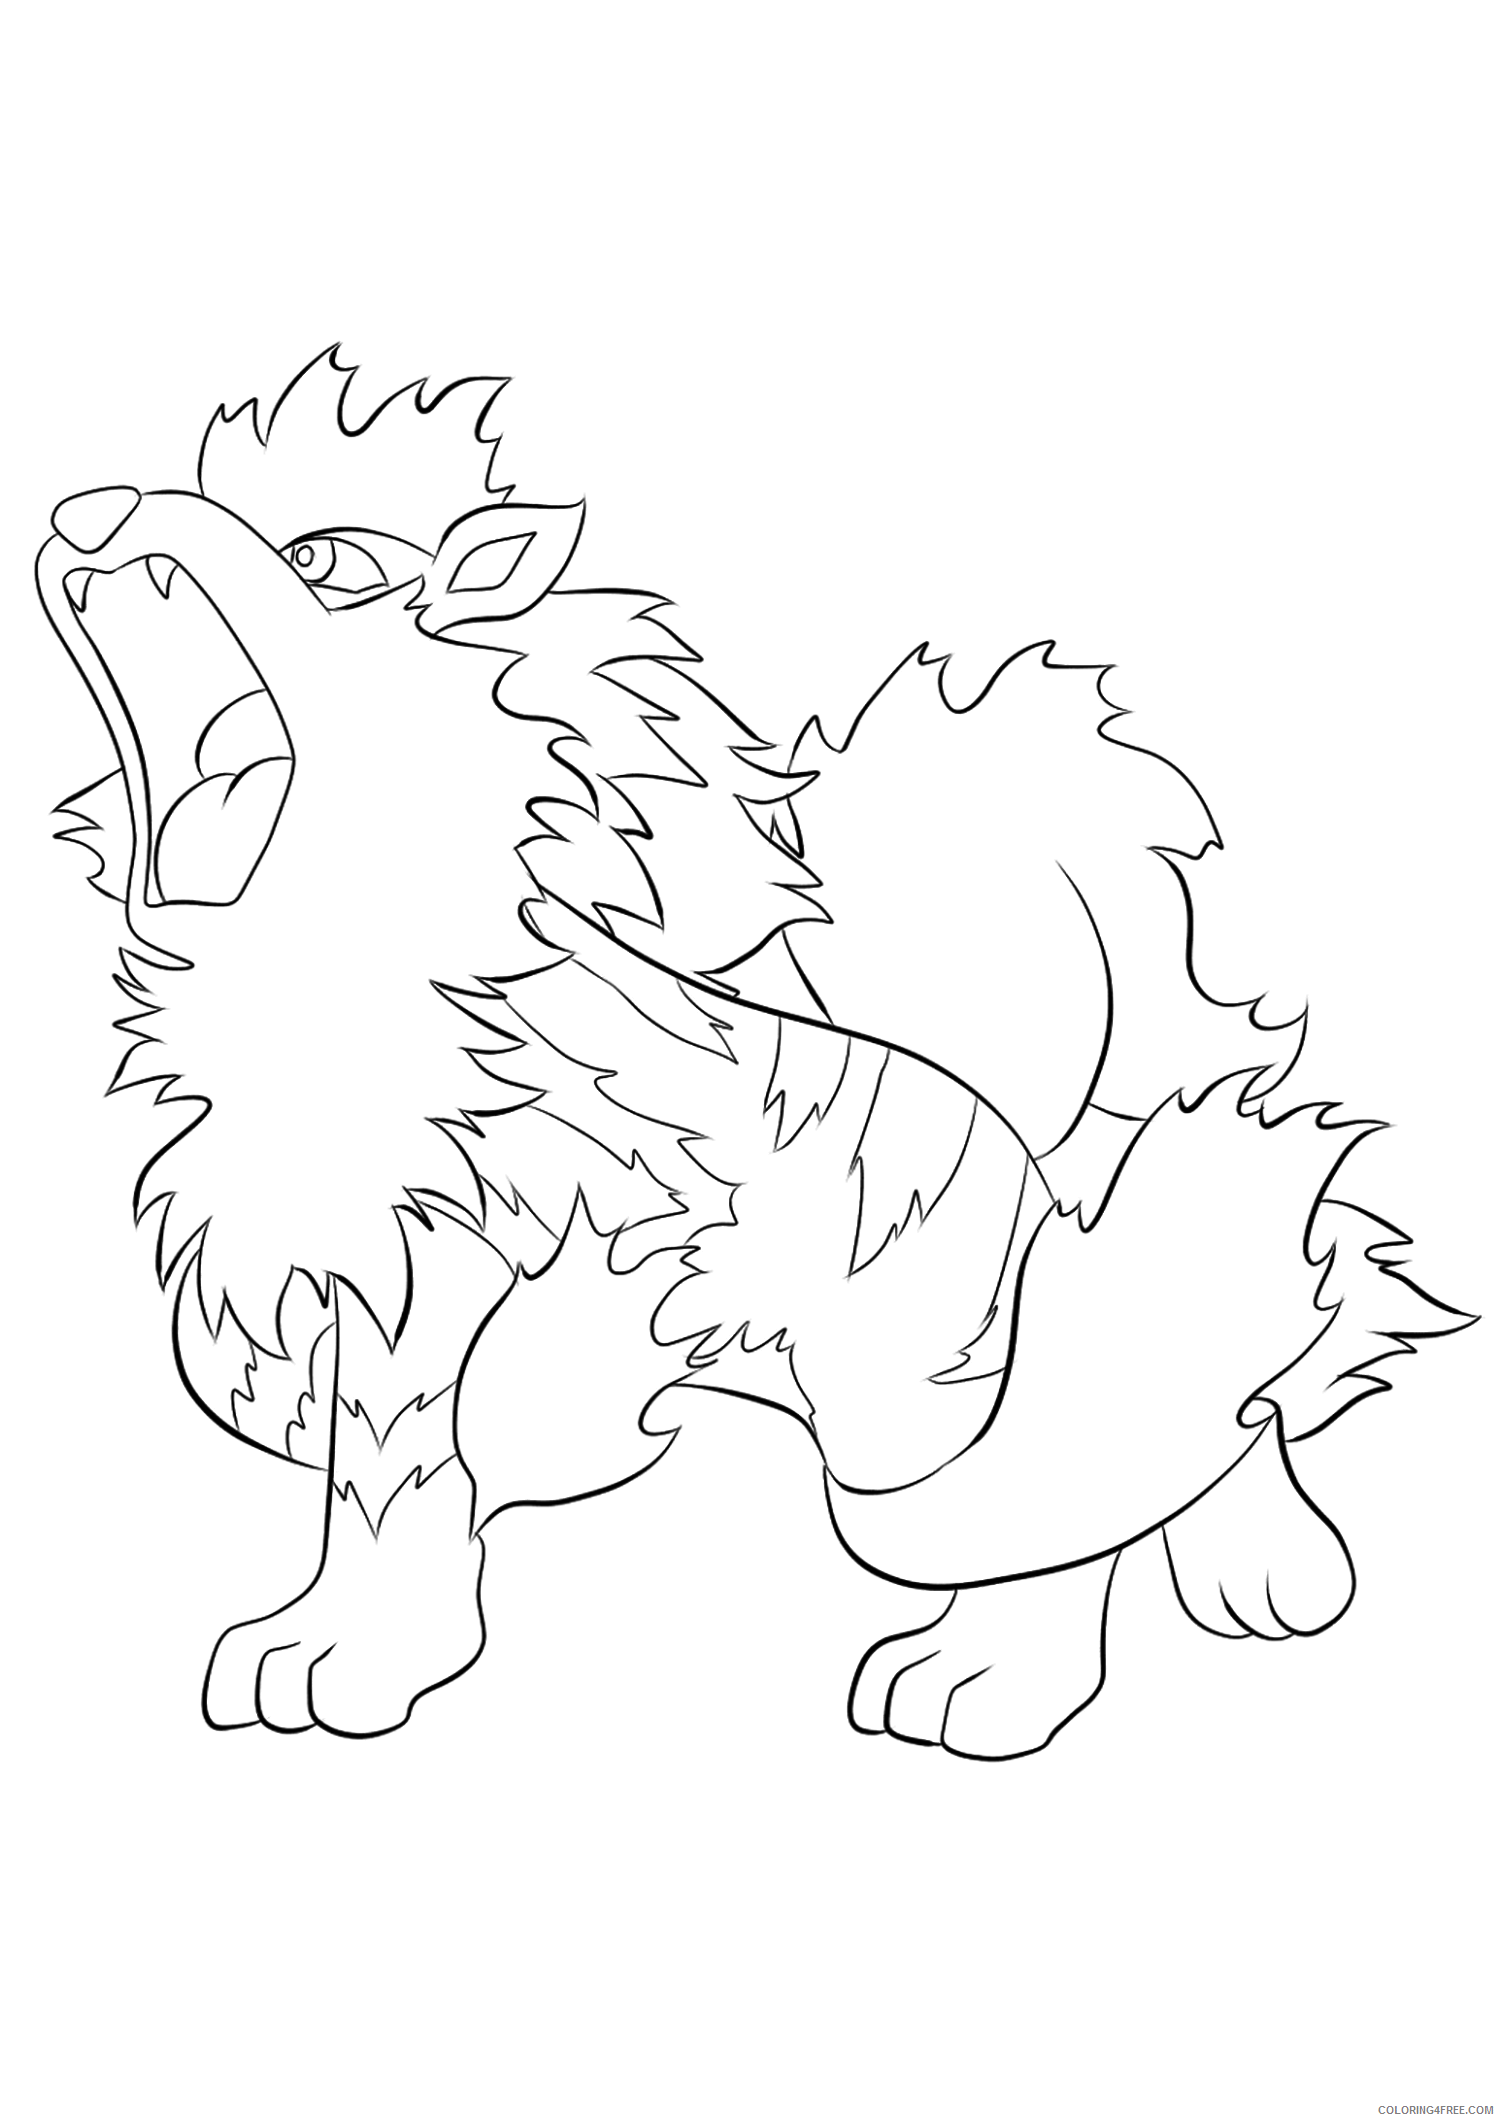 Arcanine Coloring Pages Printable Sheets Arcanine No 59 Pokemon Generation 2021 a 2308 Coloring4free